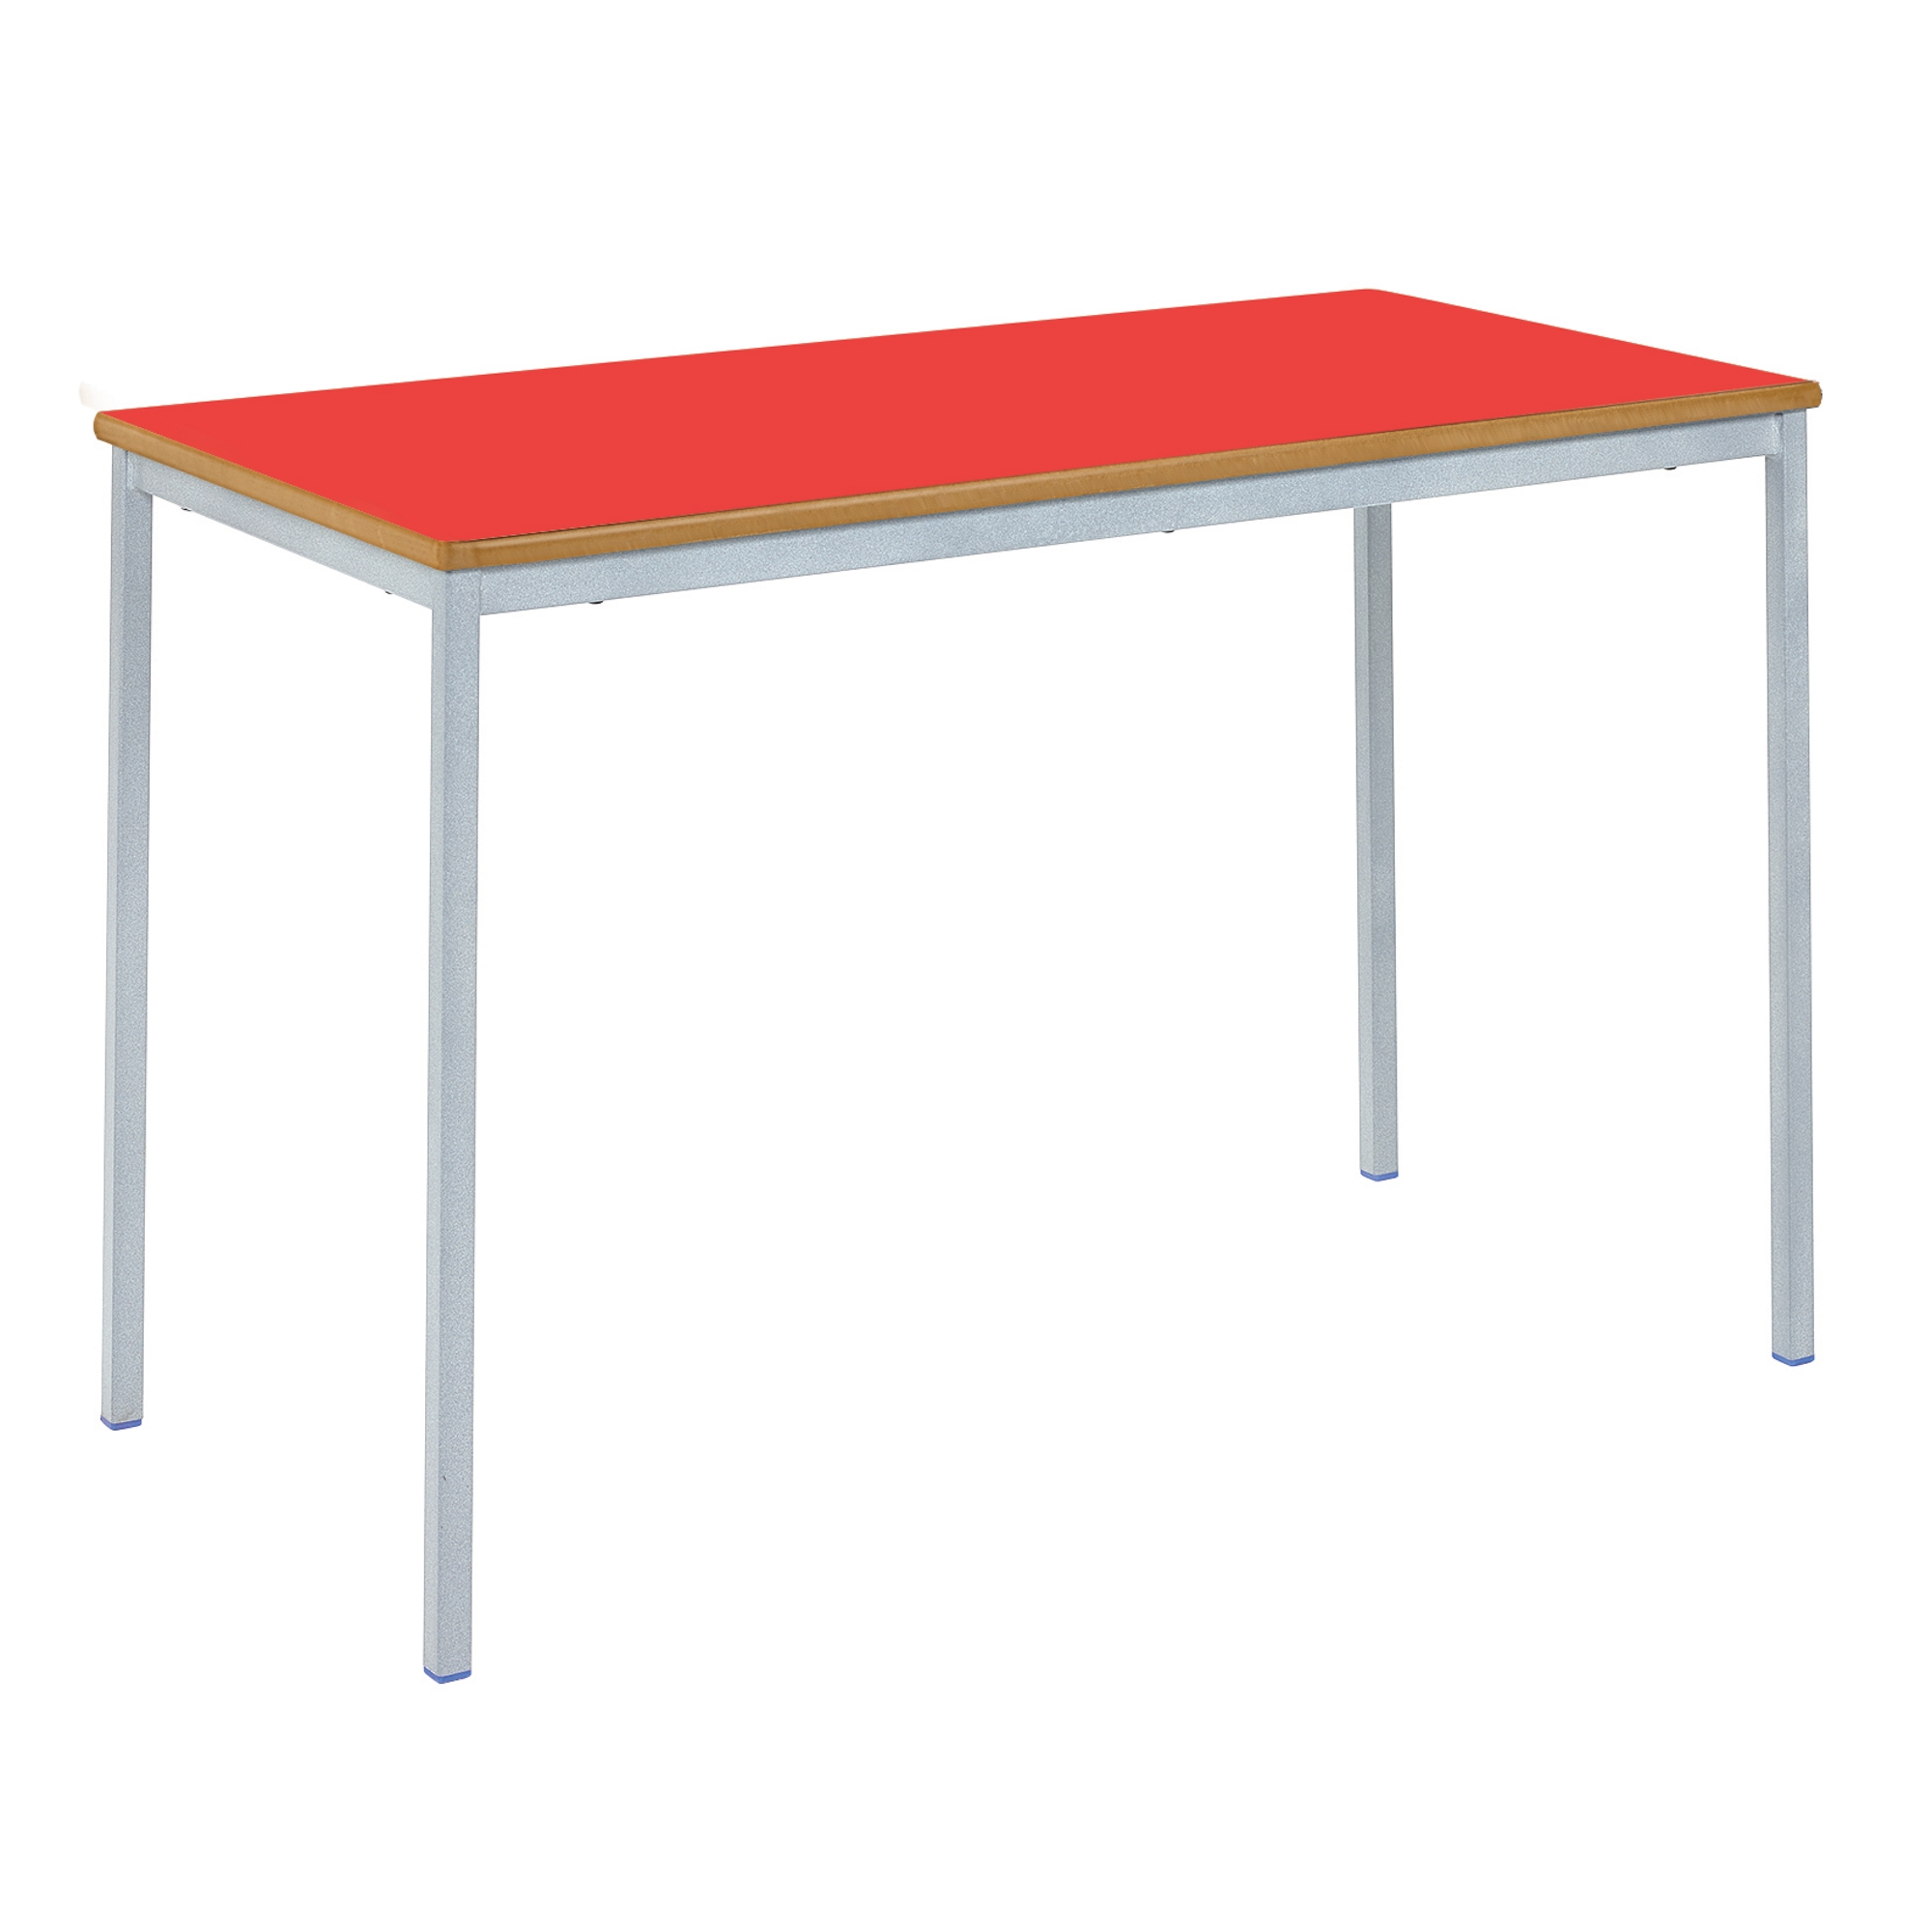 Classmates Rectangular Fully Welded Classroom Table - 1100 x 550 x 530mm - Red